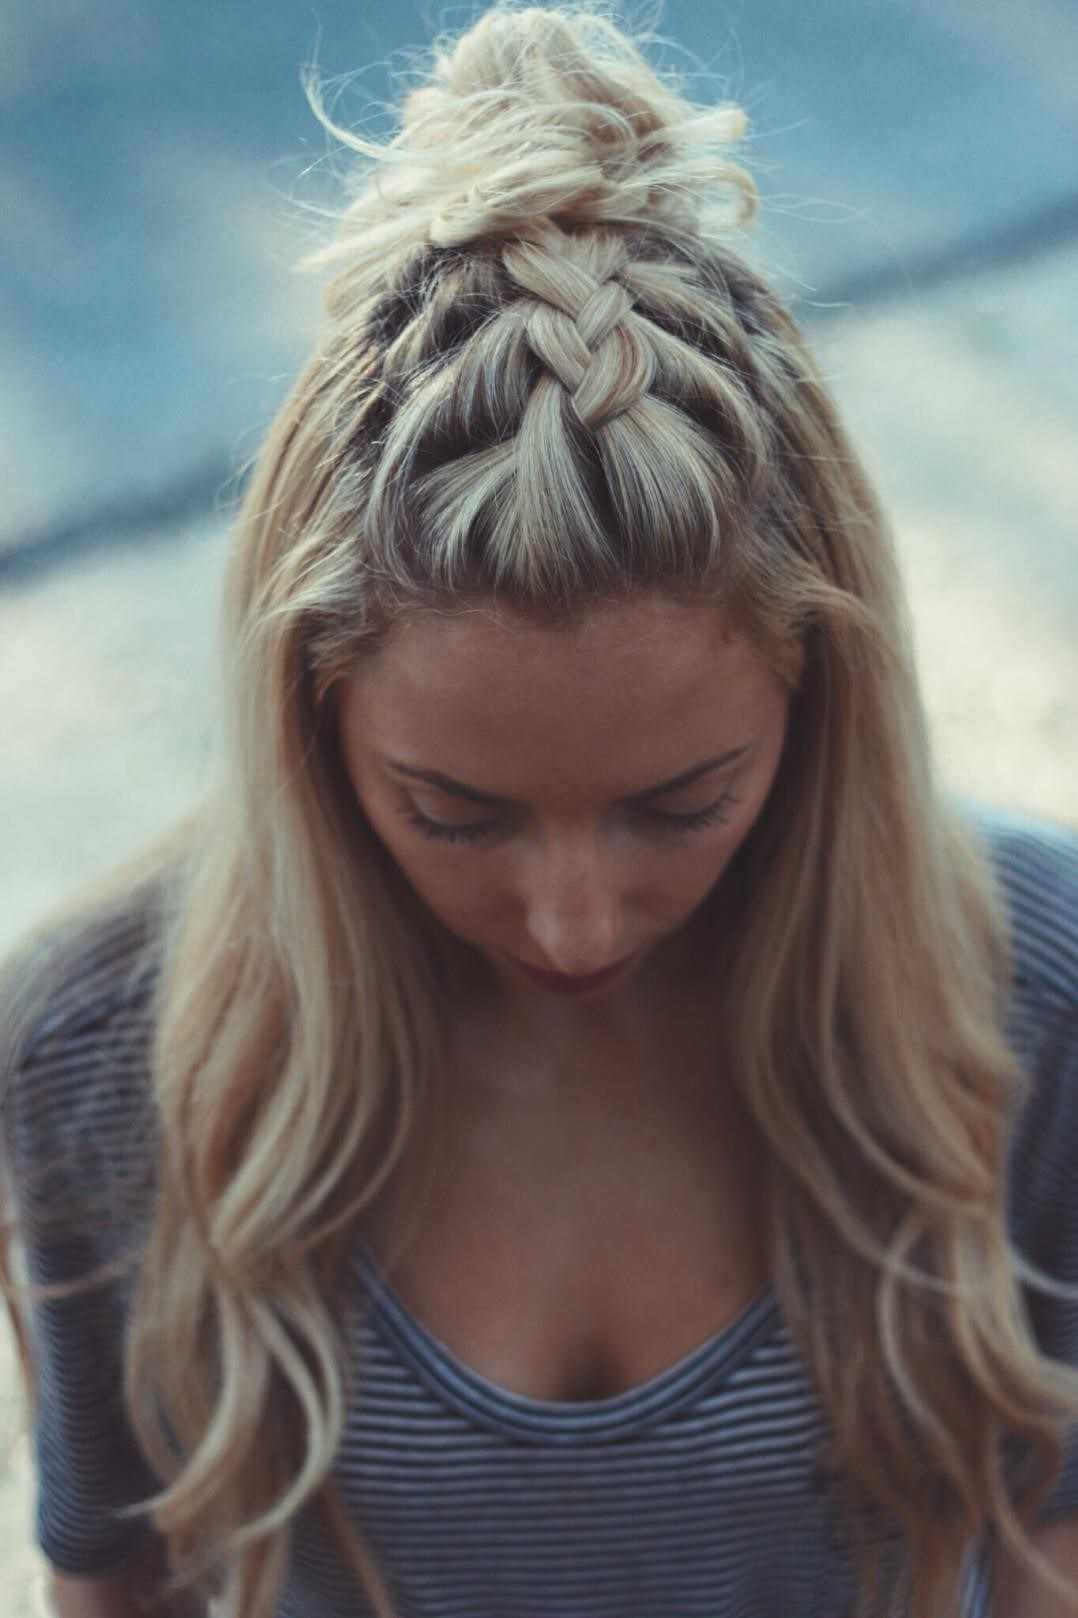 40 Inspiring Ideas for French Braids that Stand Out